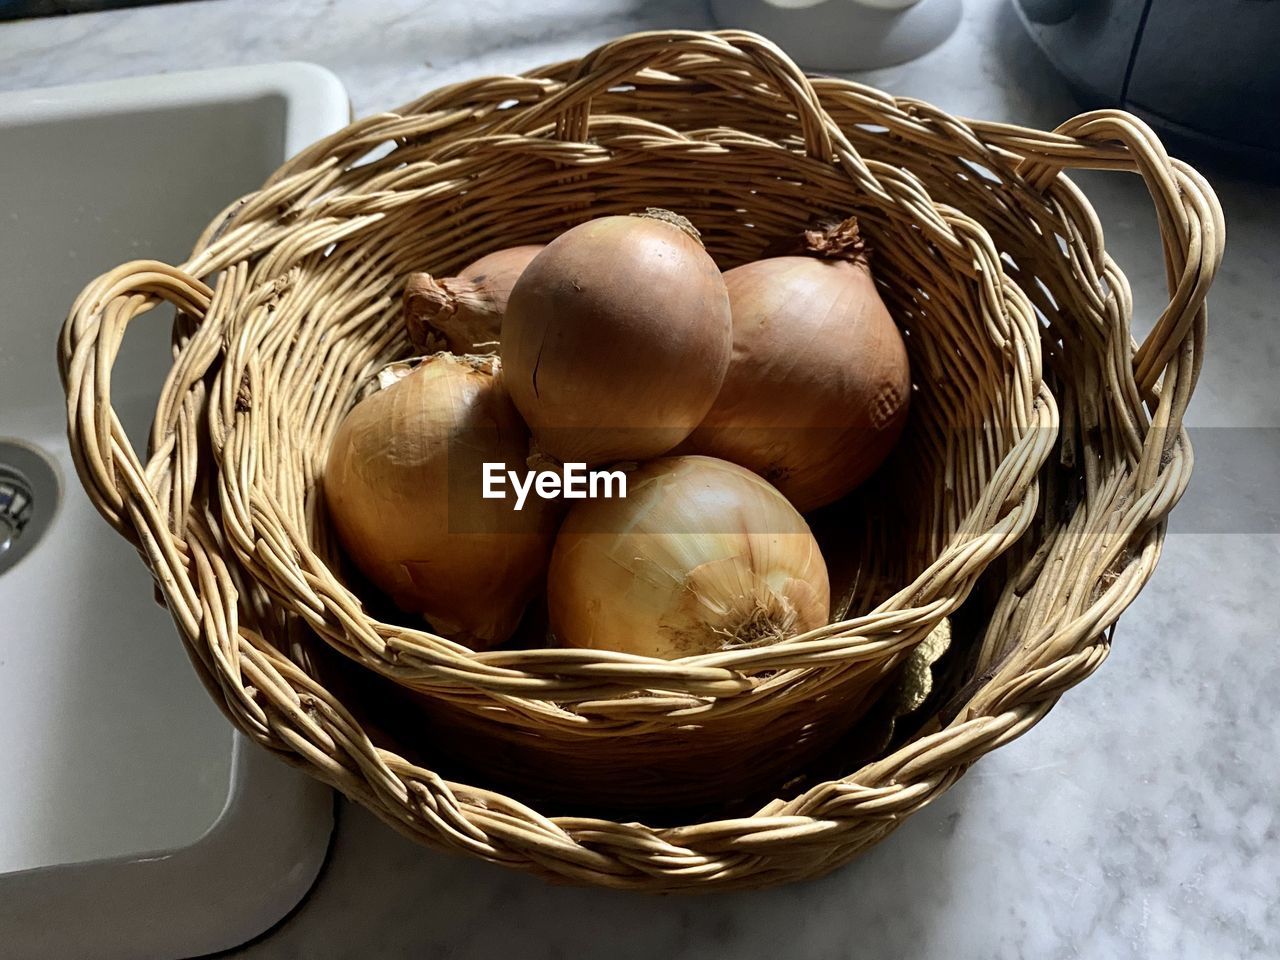 basket, container, food, food and drink, wicker, indoors, freshness, still life, no people, egg, high angle view, healthy eating, wellbeing, produce, close-up